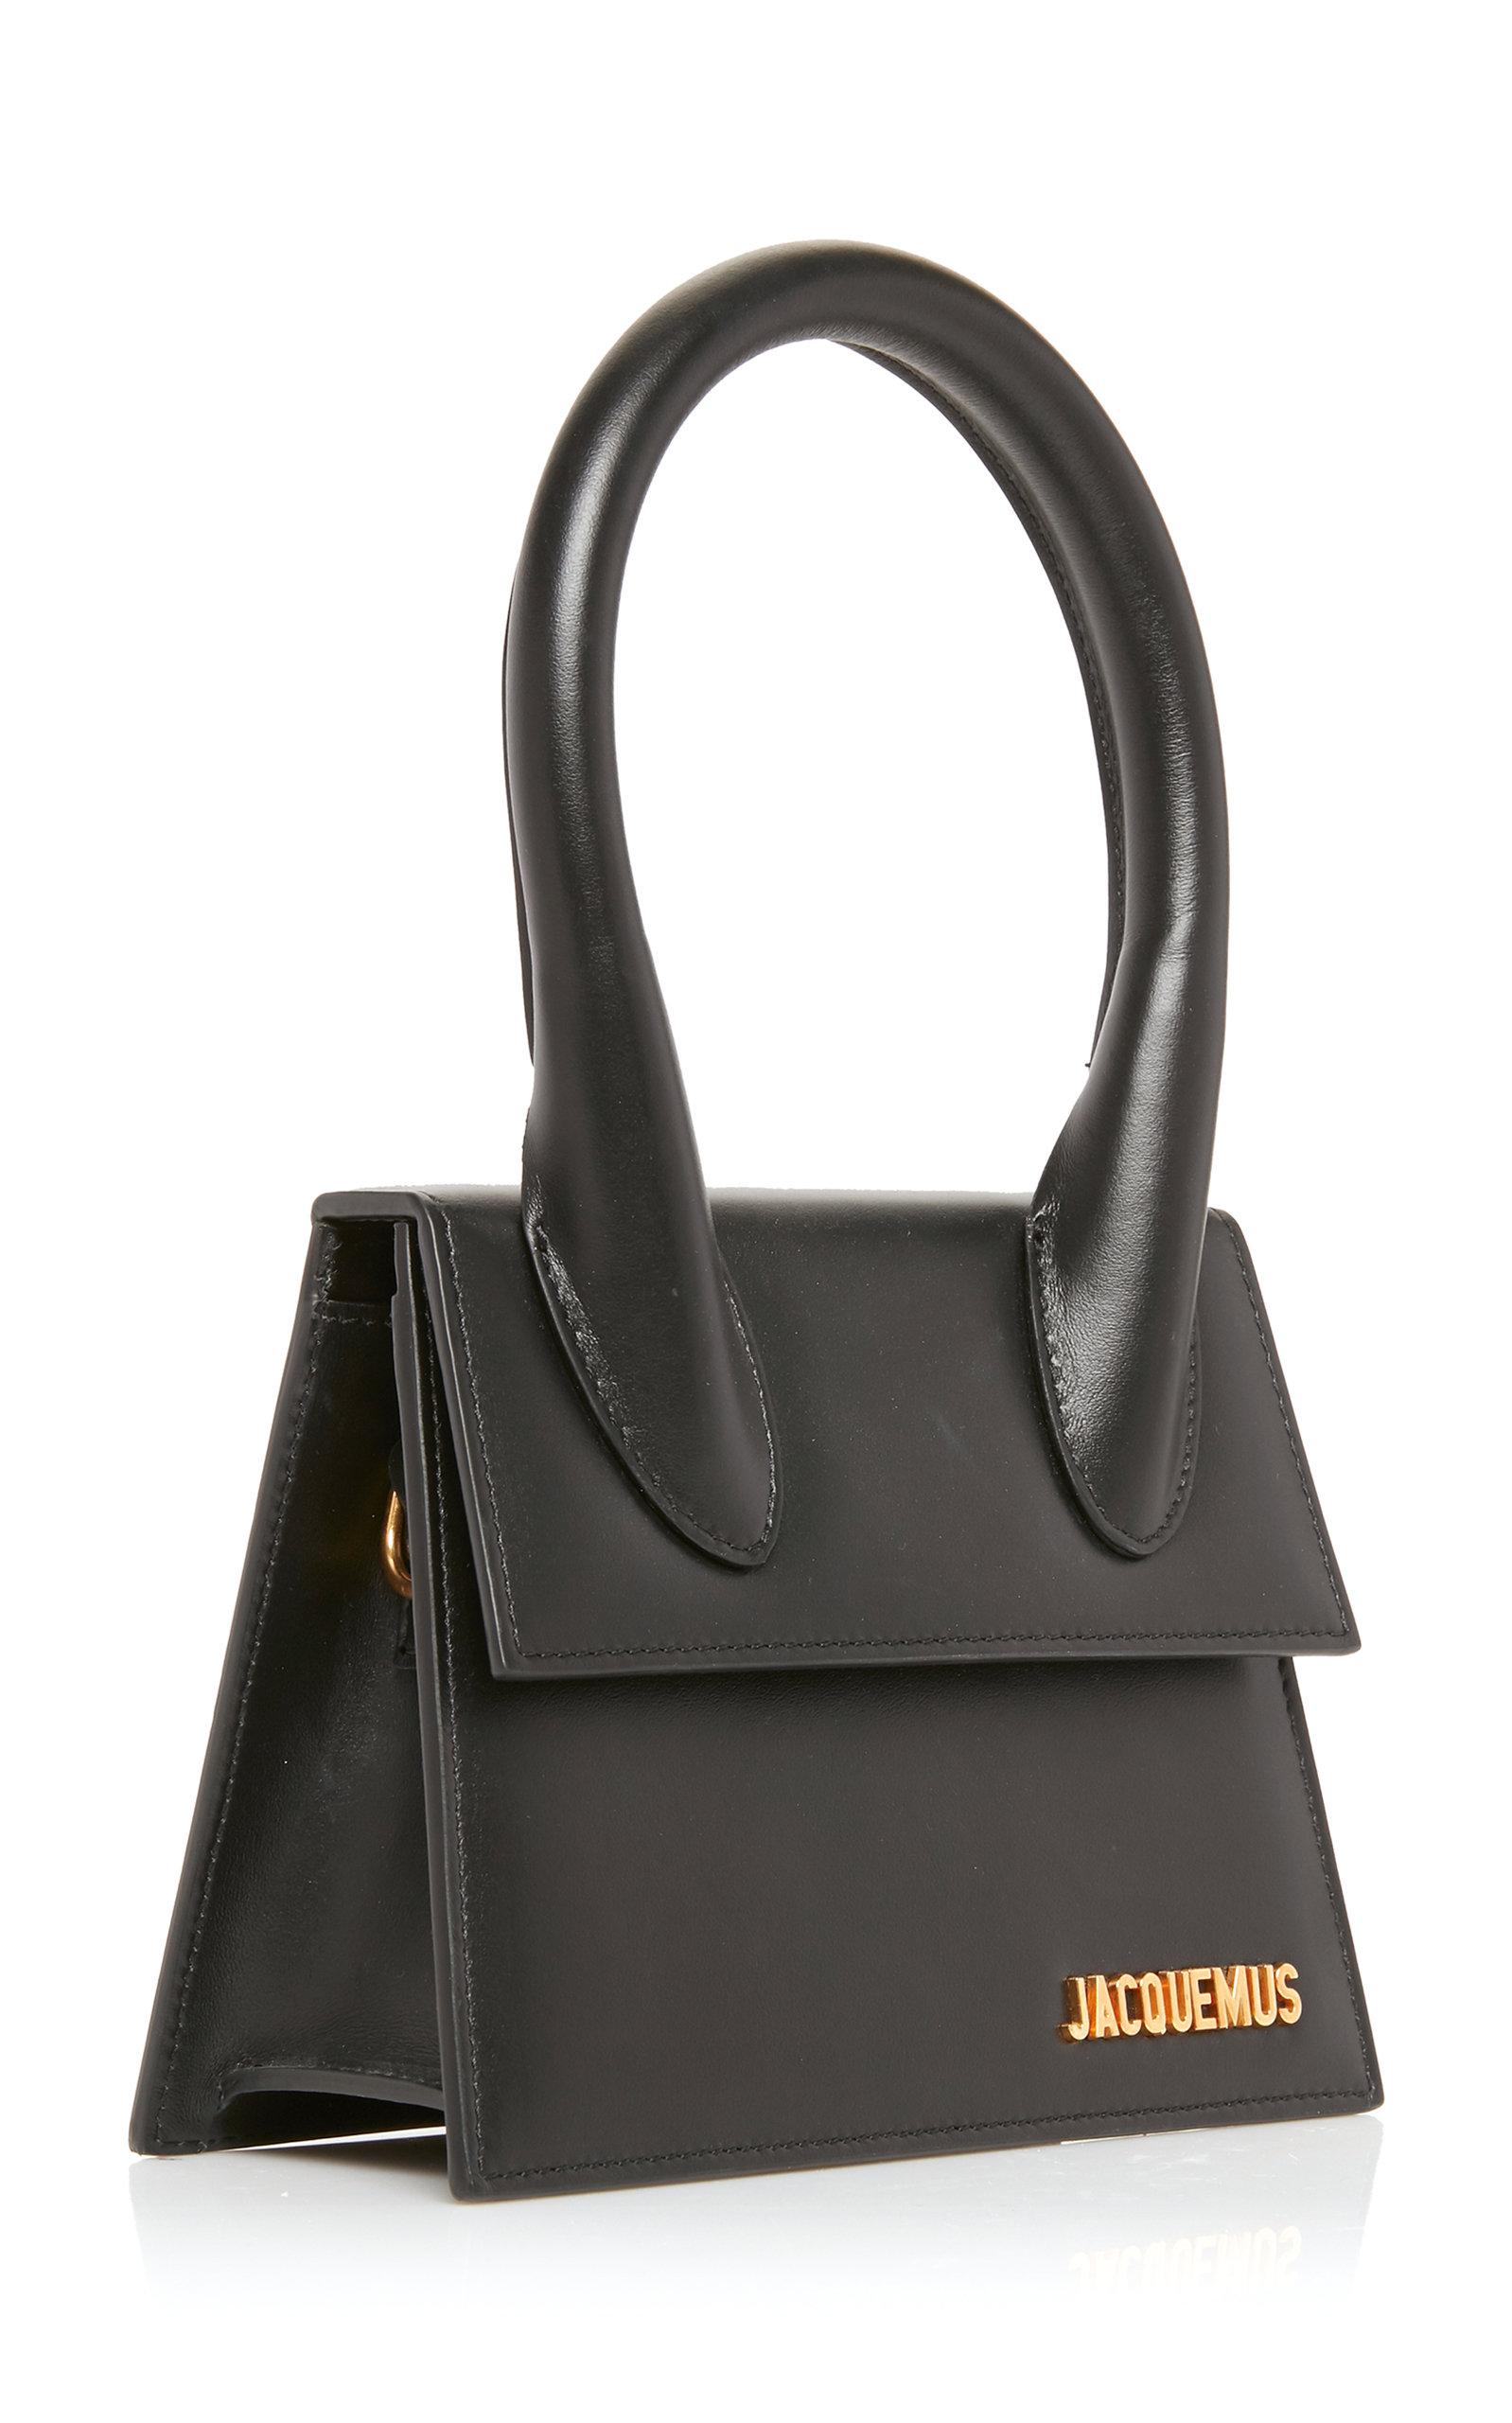 Jacquemus Le Chiquito Moyen Leather Top Handle Bag in Black - Lyst